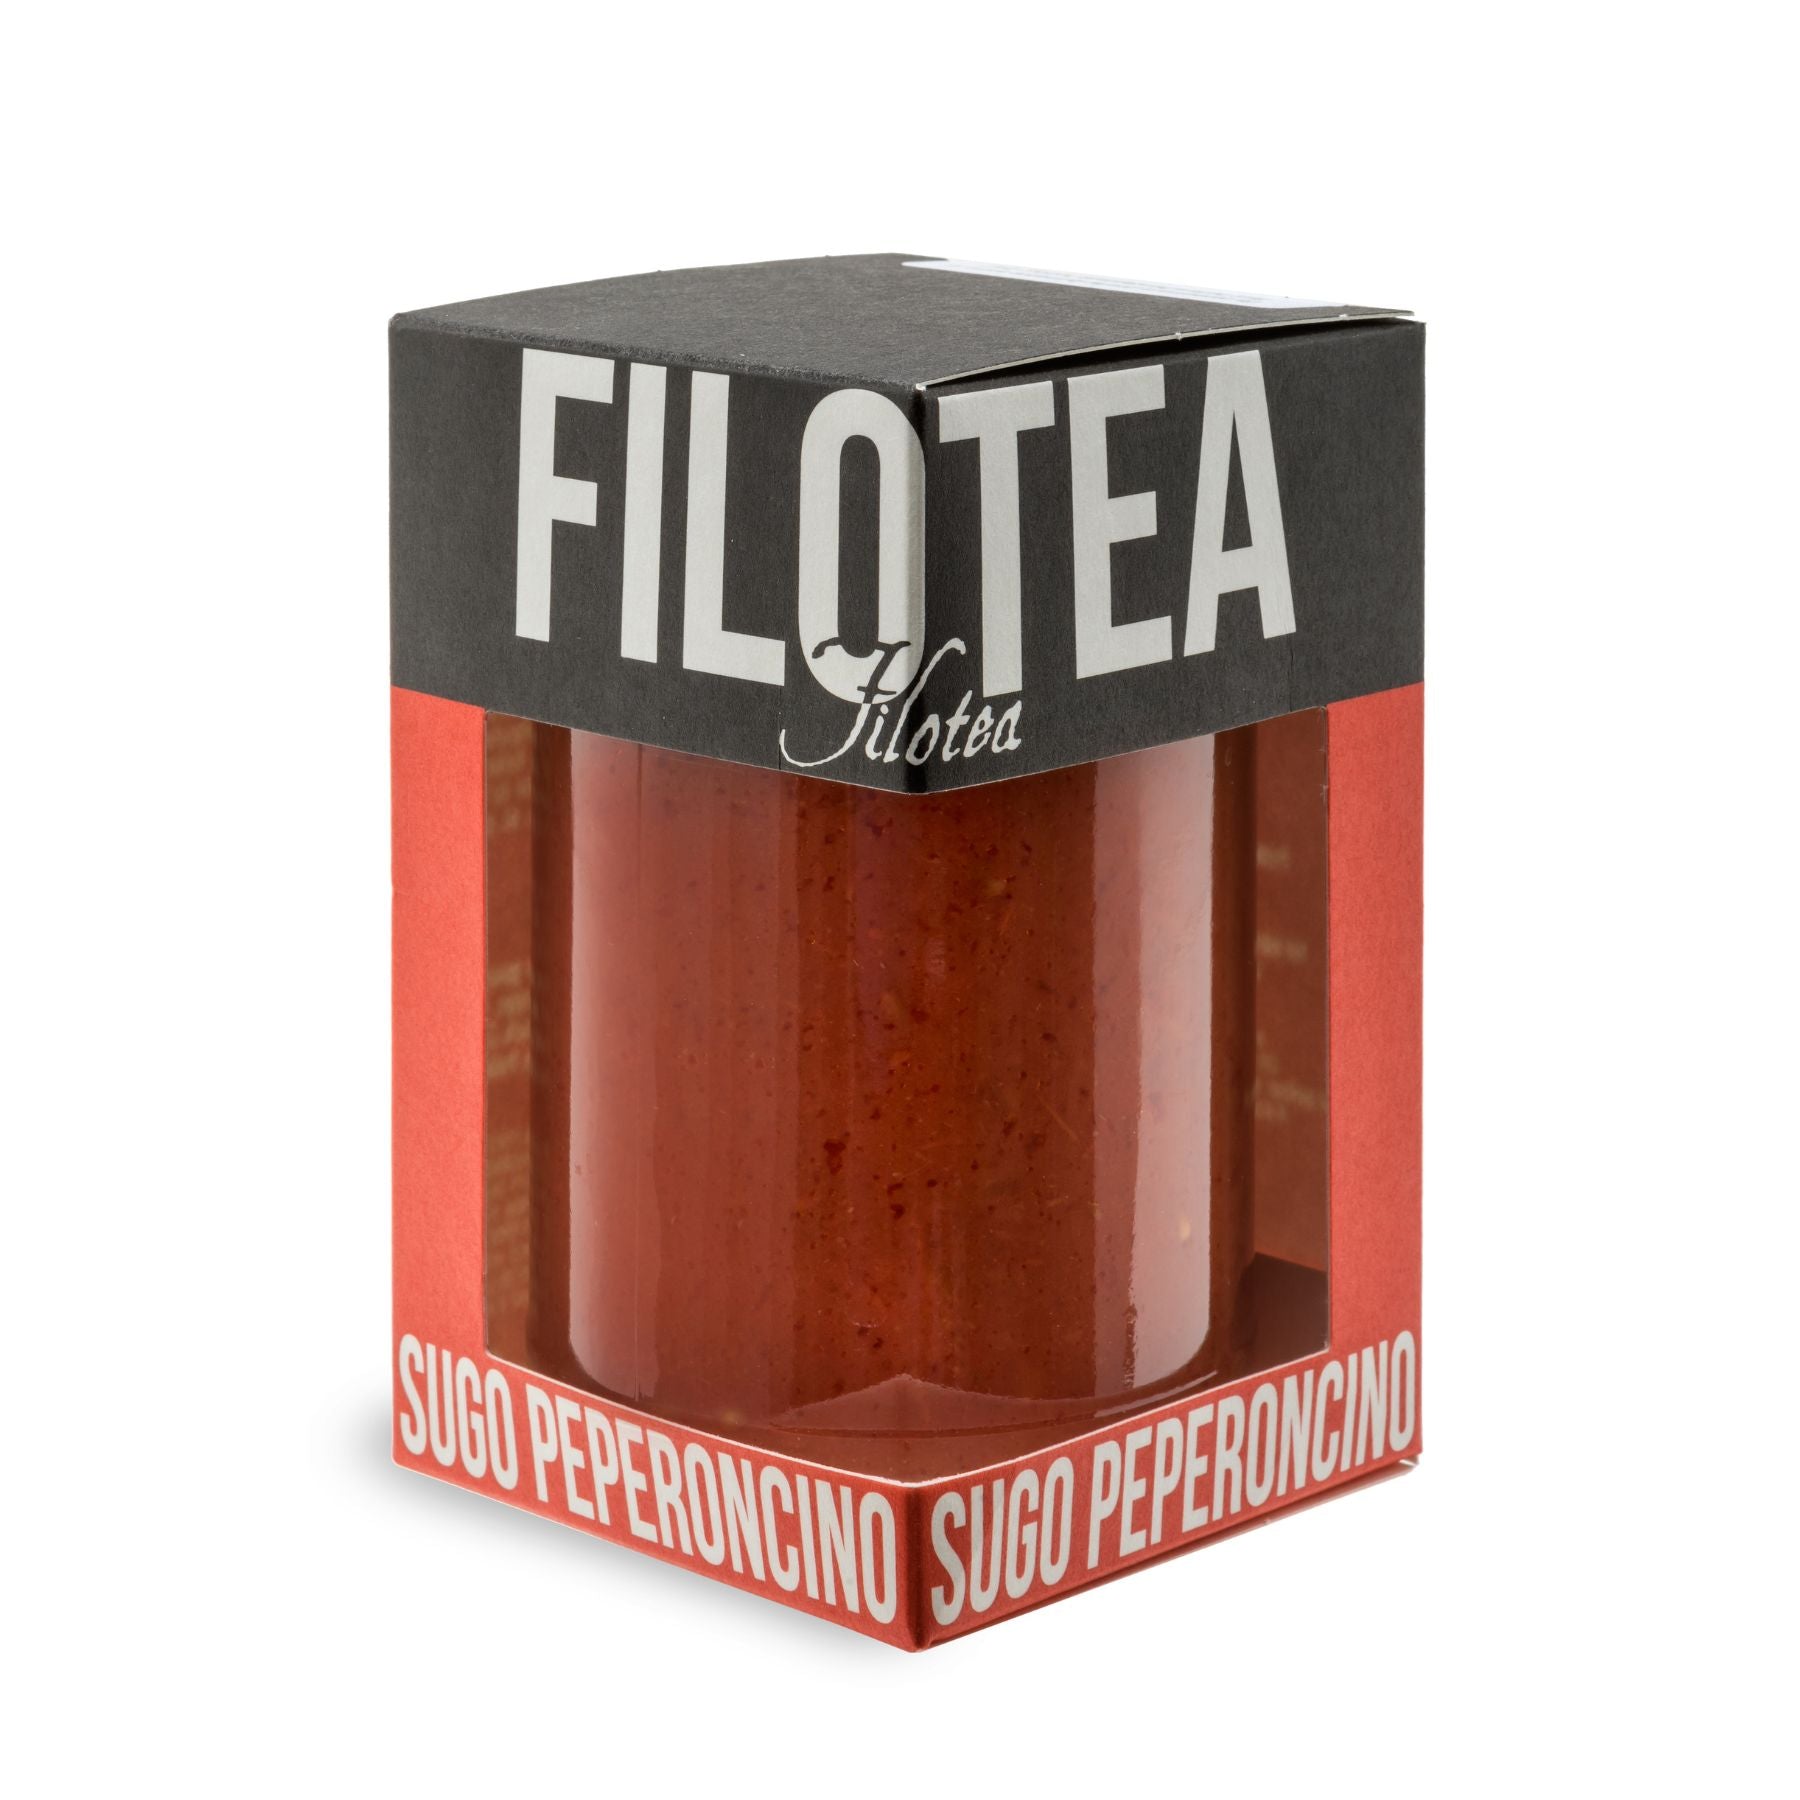 Filotea Arrabbiata Pasta Sauce 280g | Imported and distributed in the UK by Just Gourmet Foods